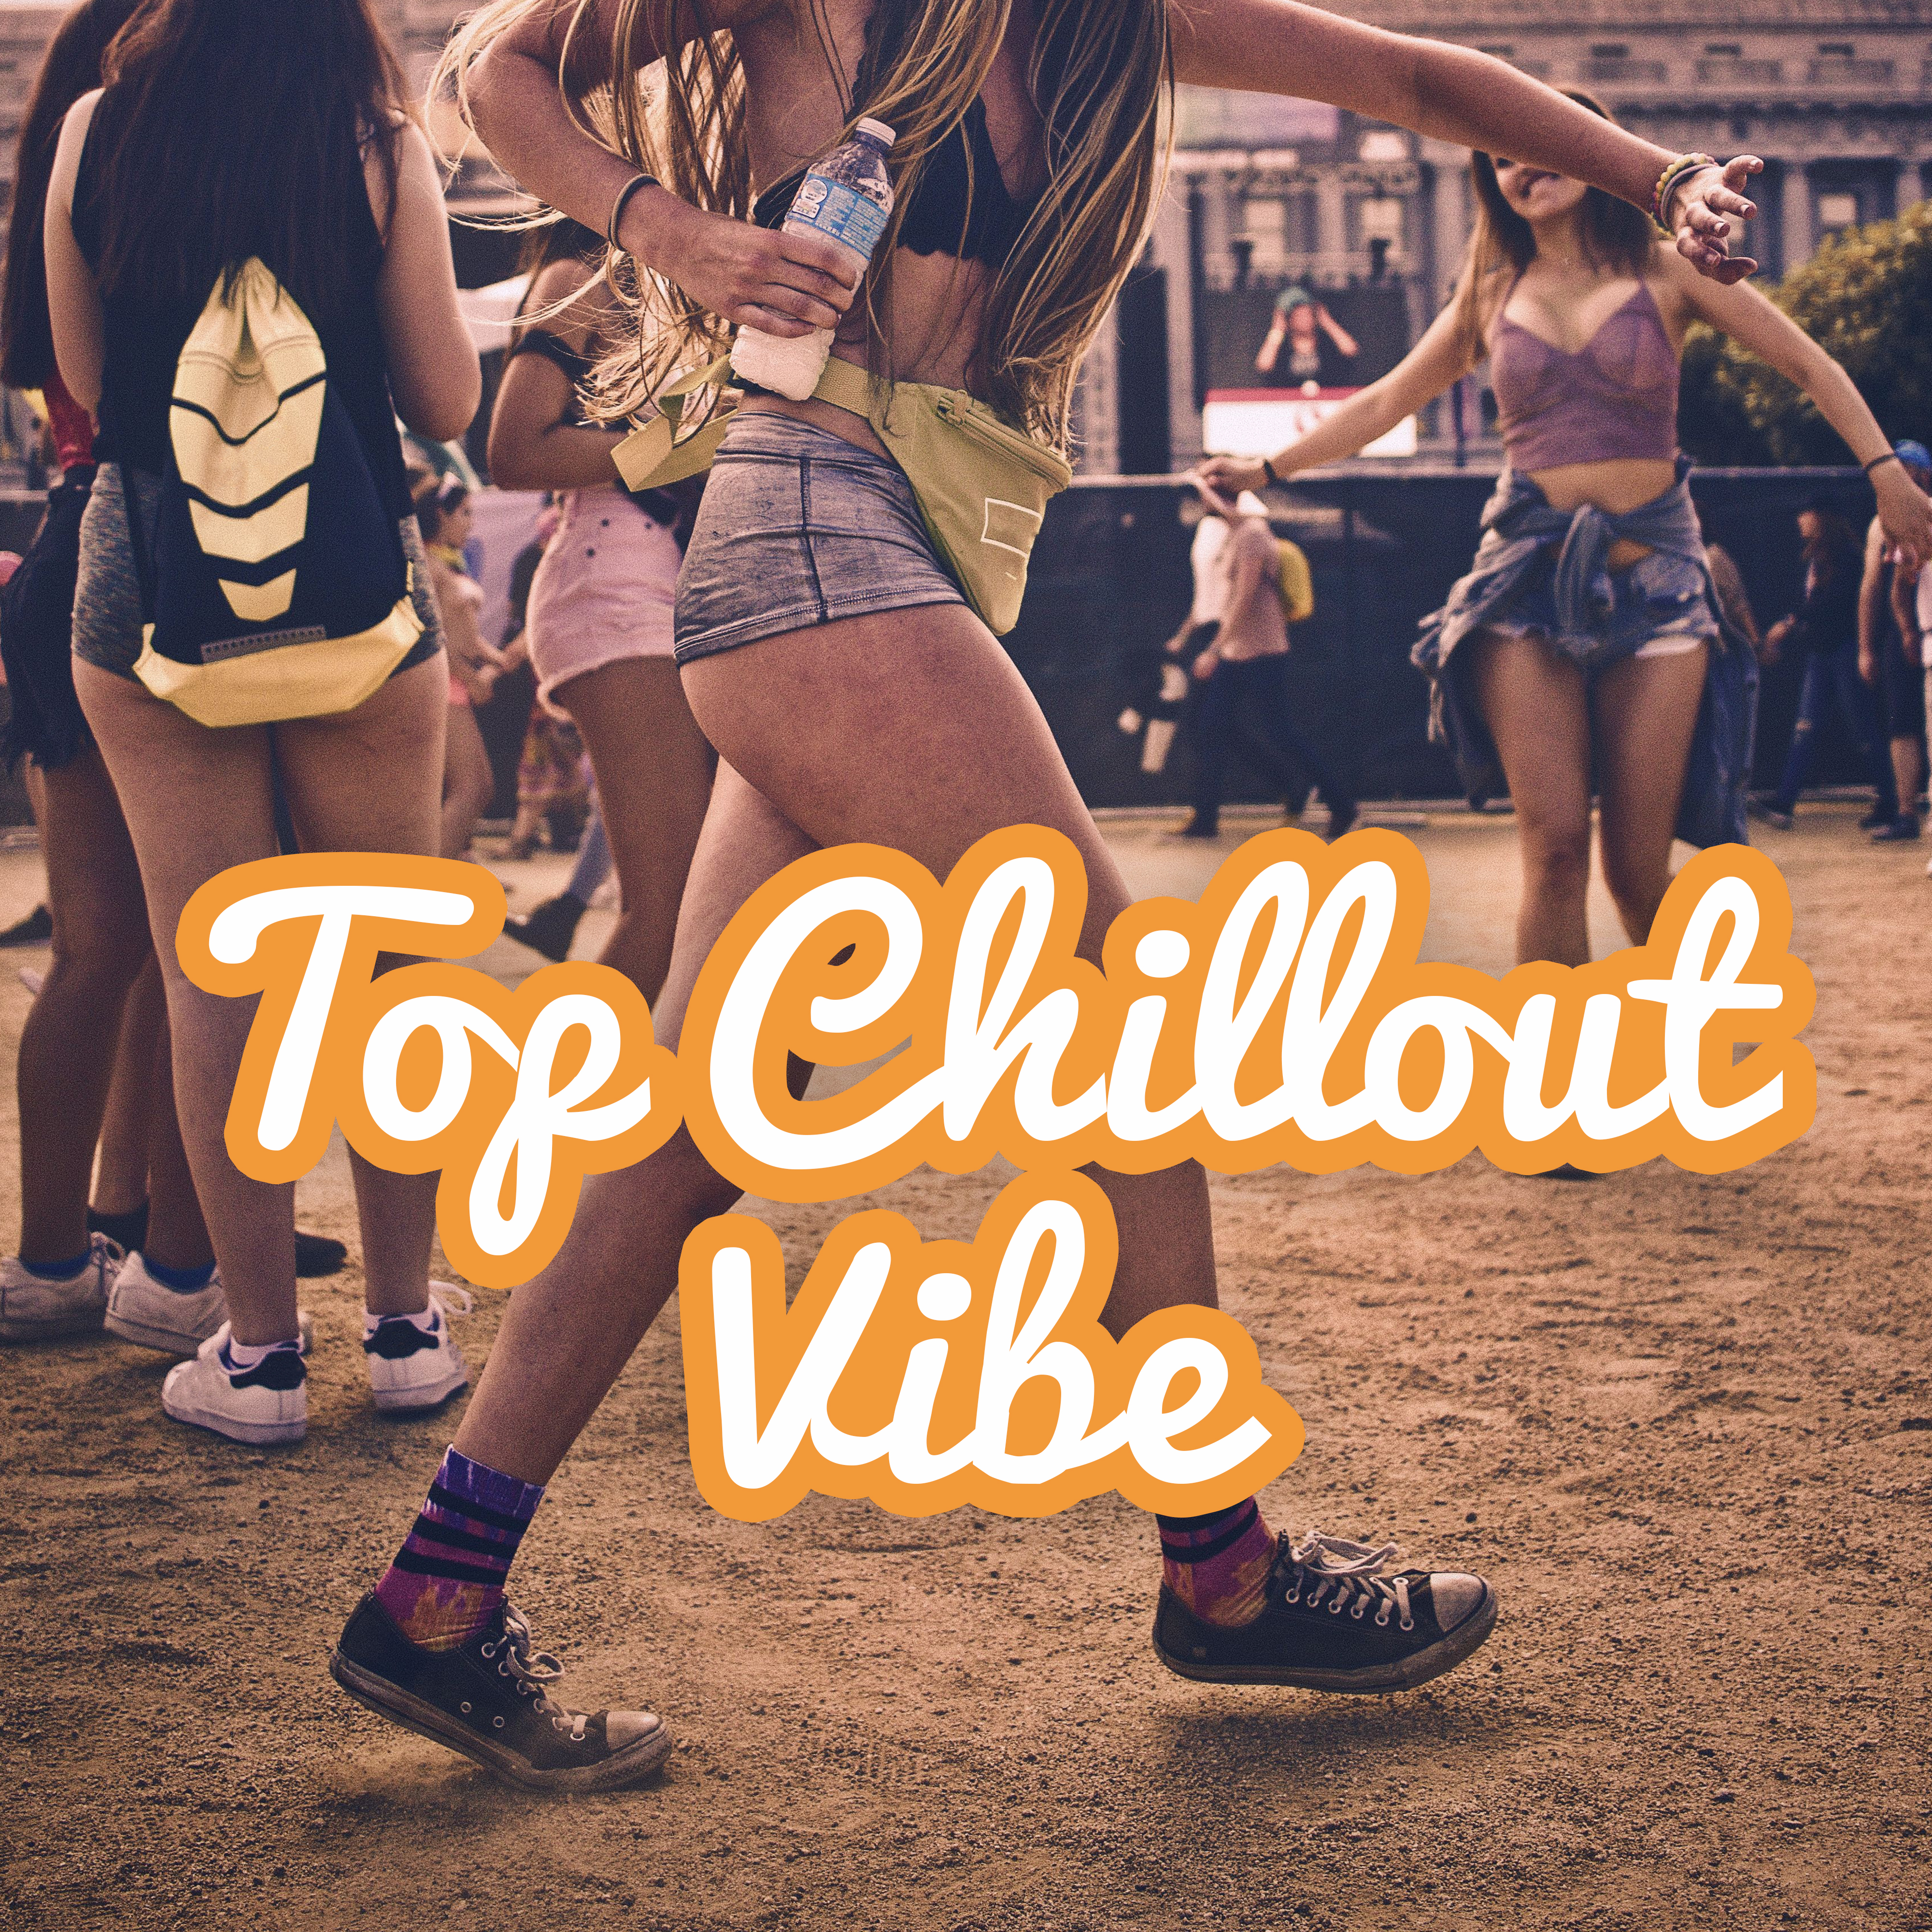 Top Chillout Vibe